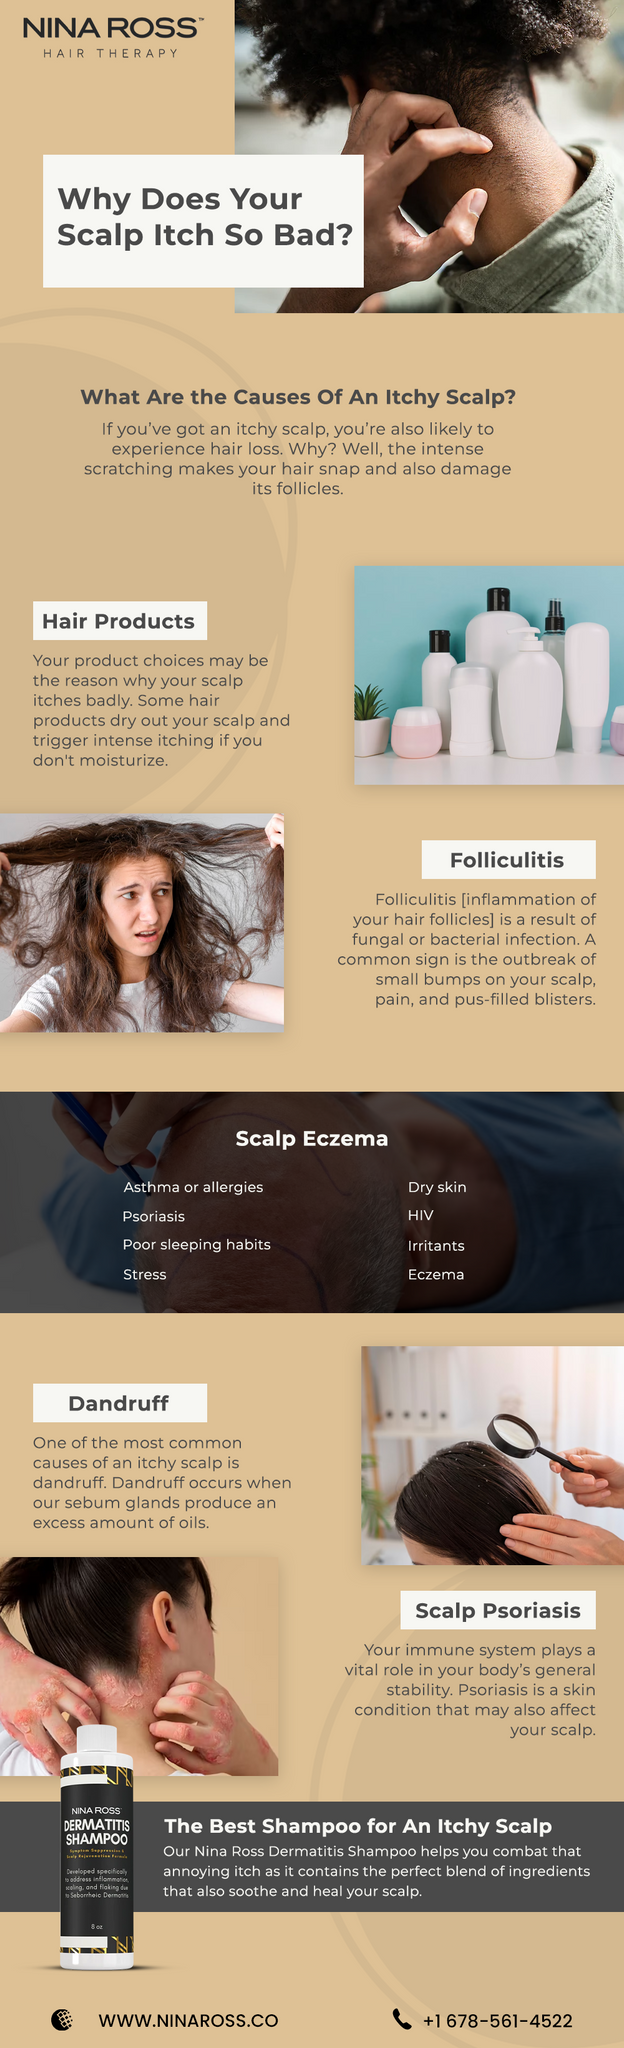 Itchy Scalp Causes